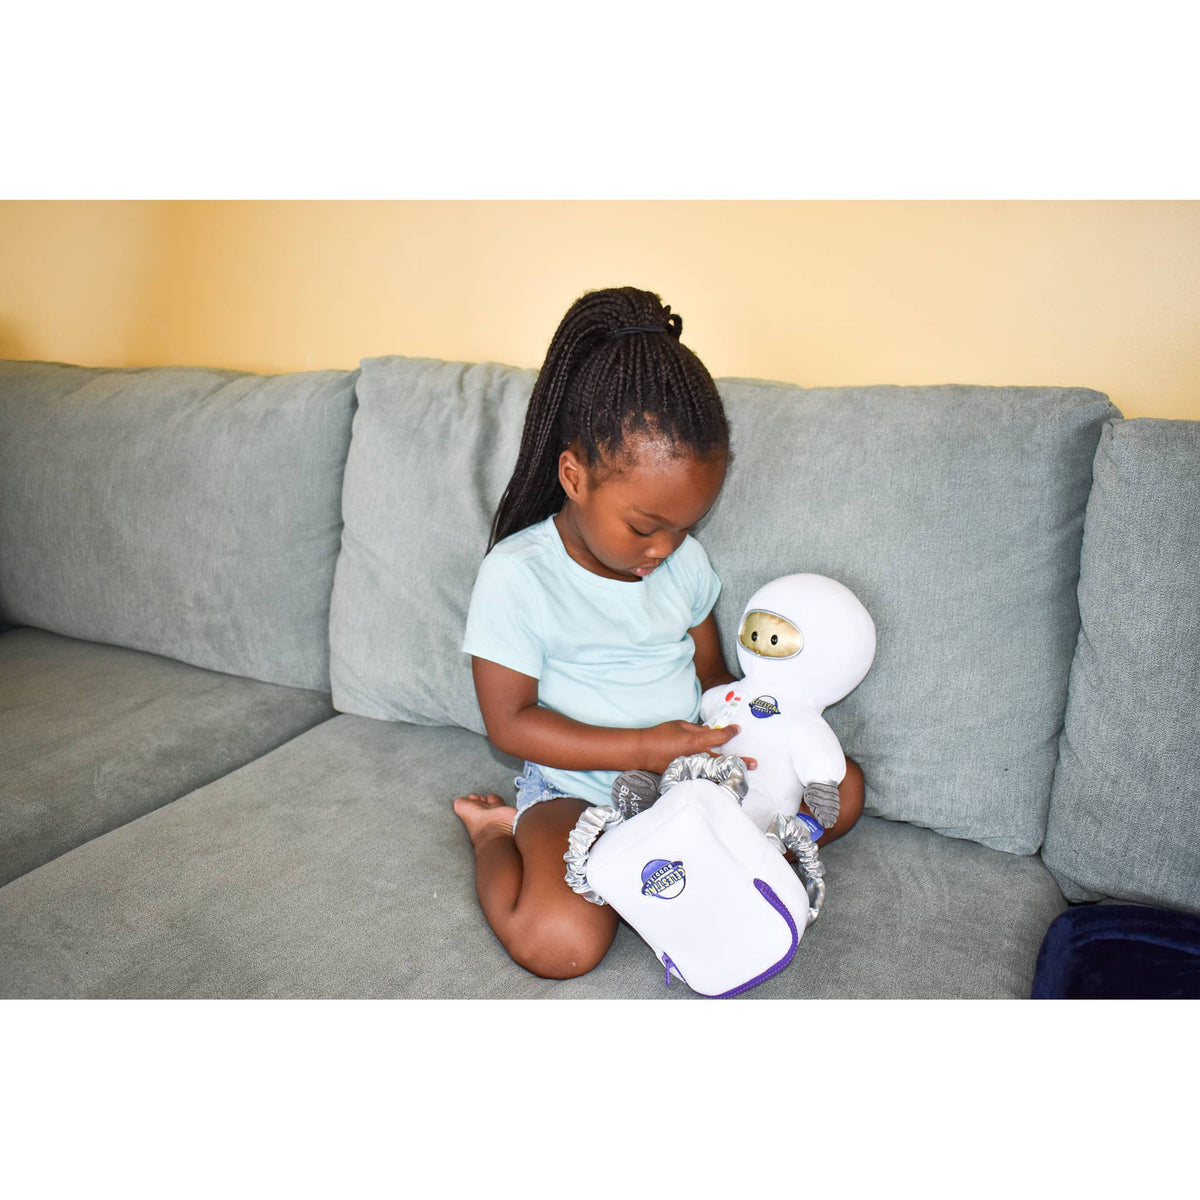 Front view of a young girl sitting on a couch playing with the AstroBuddy.